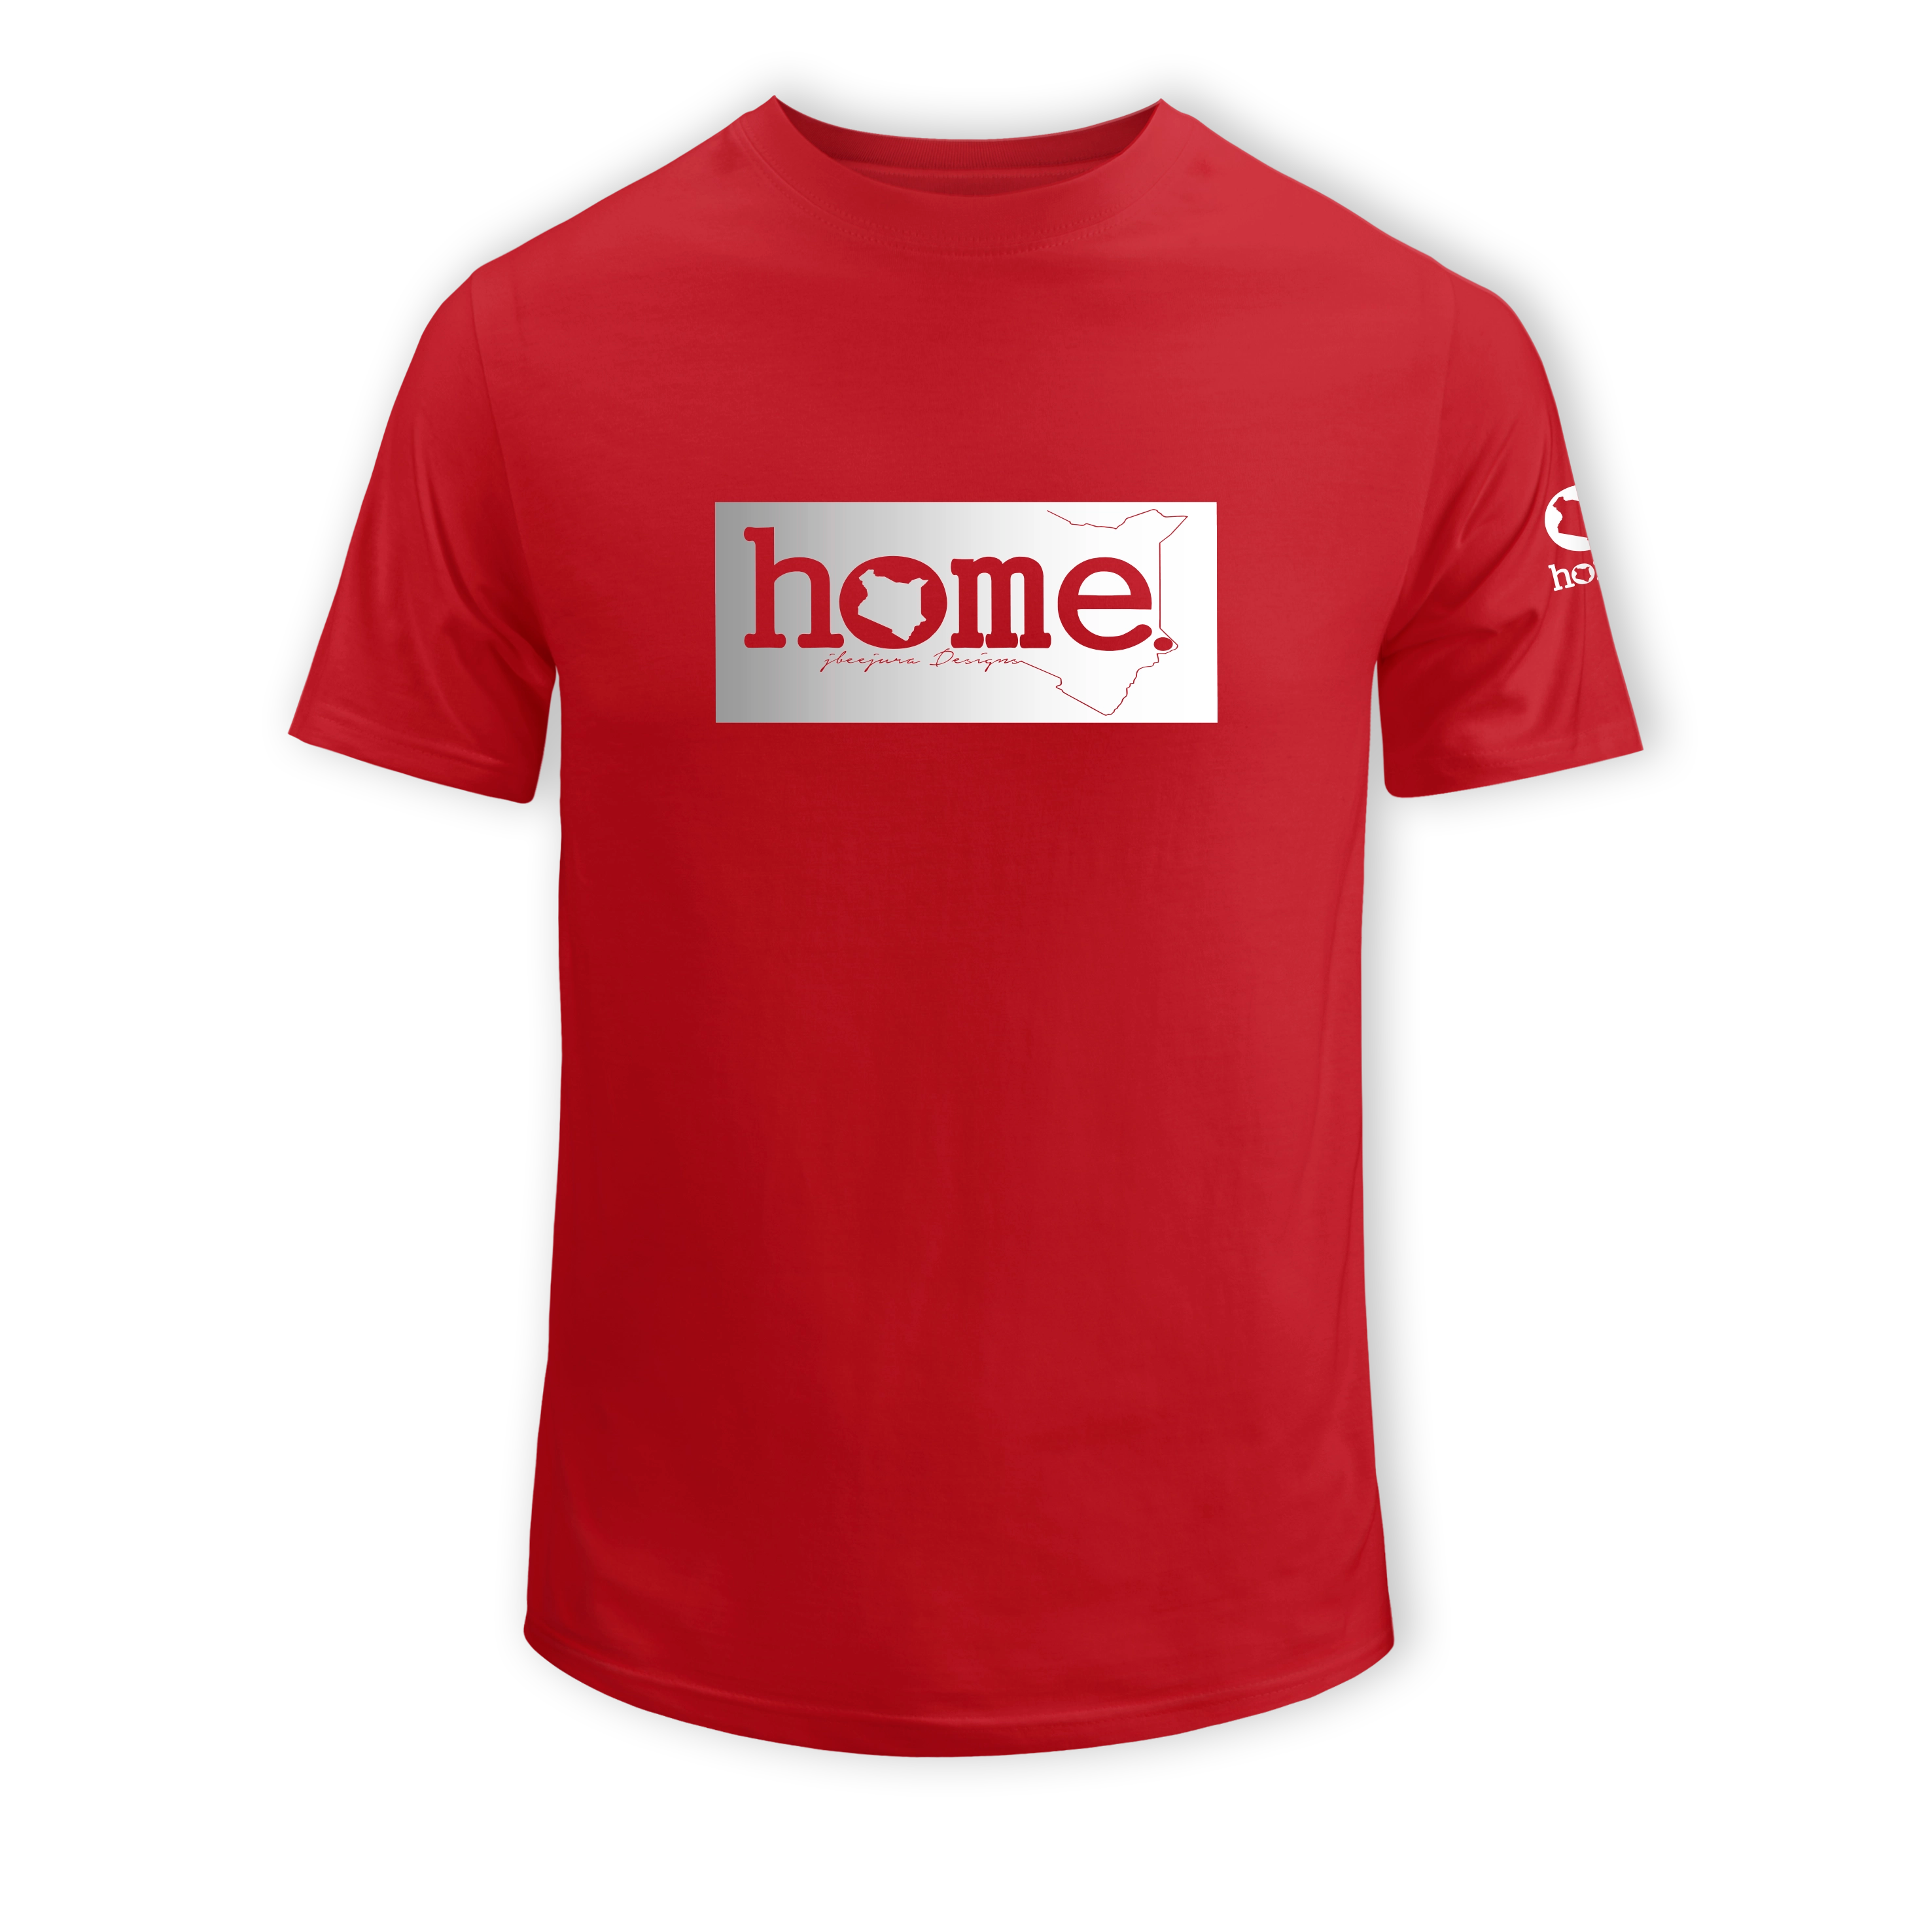 home_254 SHORT-SLEEVED RED T-SHIRT WITH A SILVER CLASSIC PRINT – COTTON PLUS FABRIC